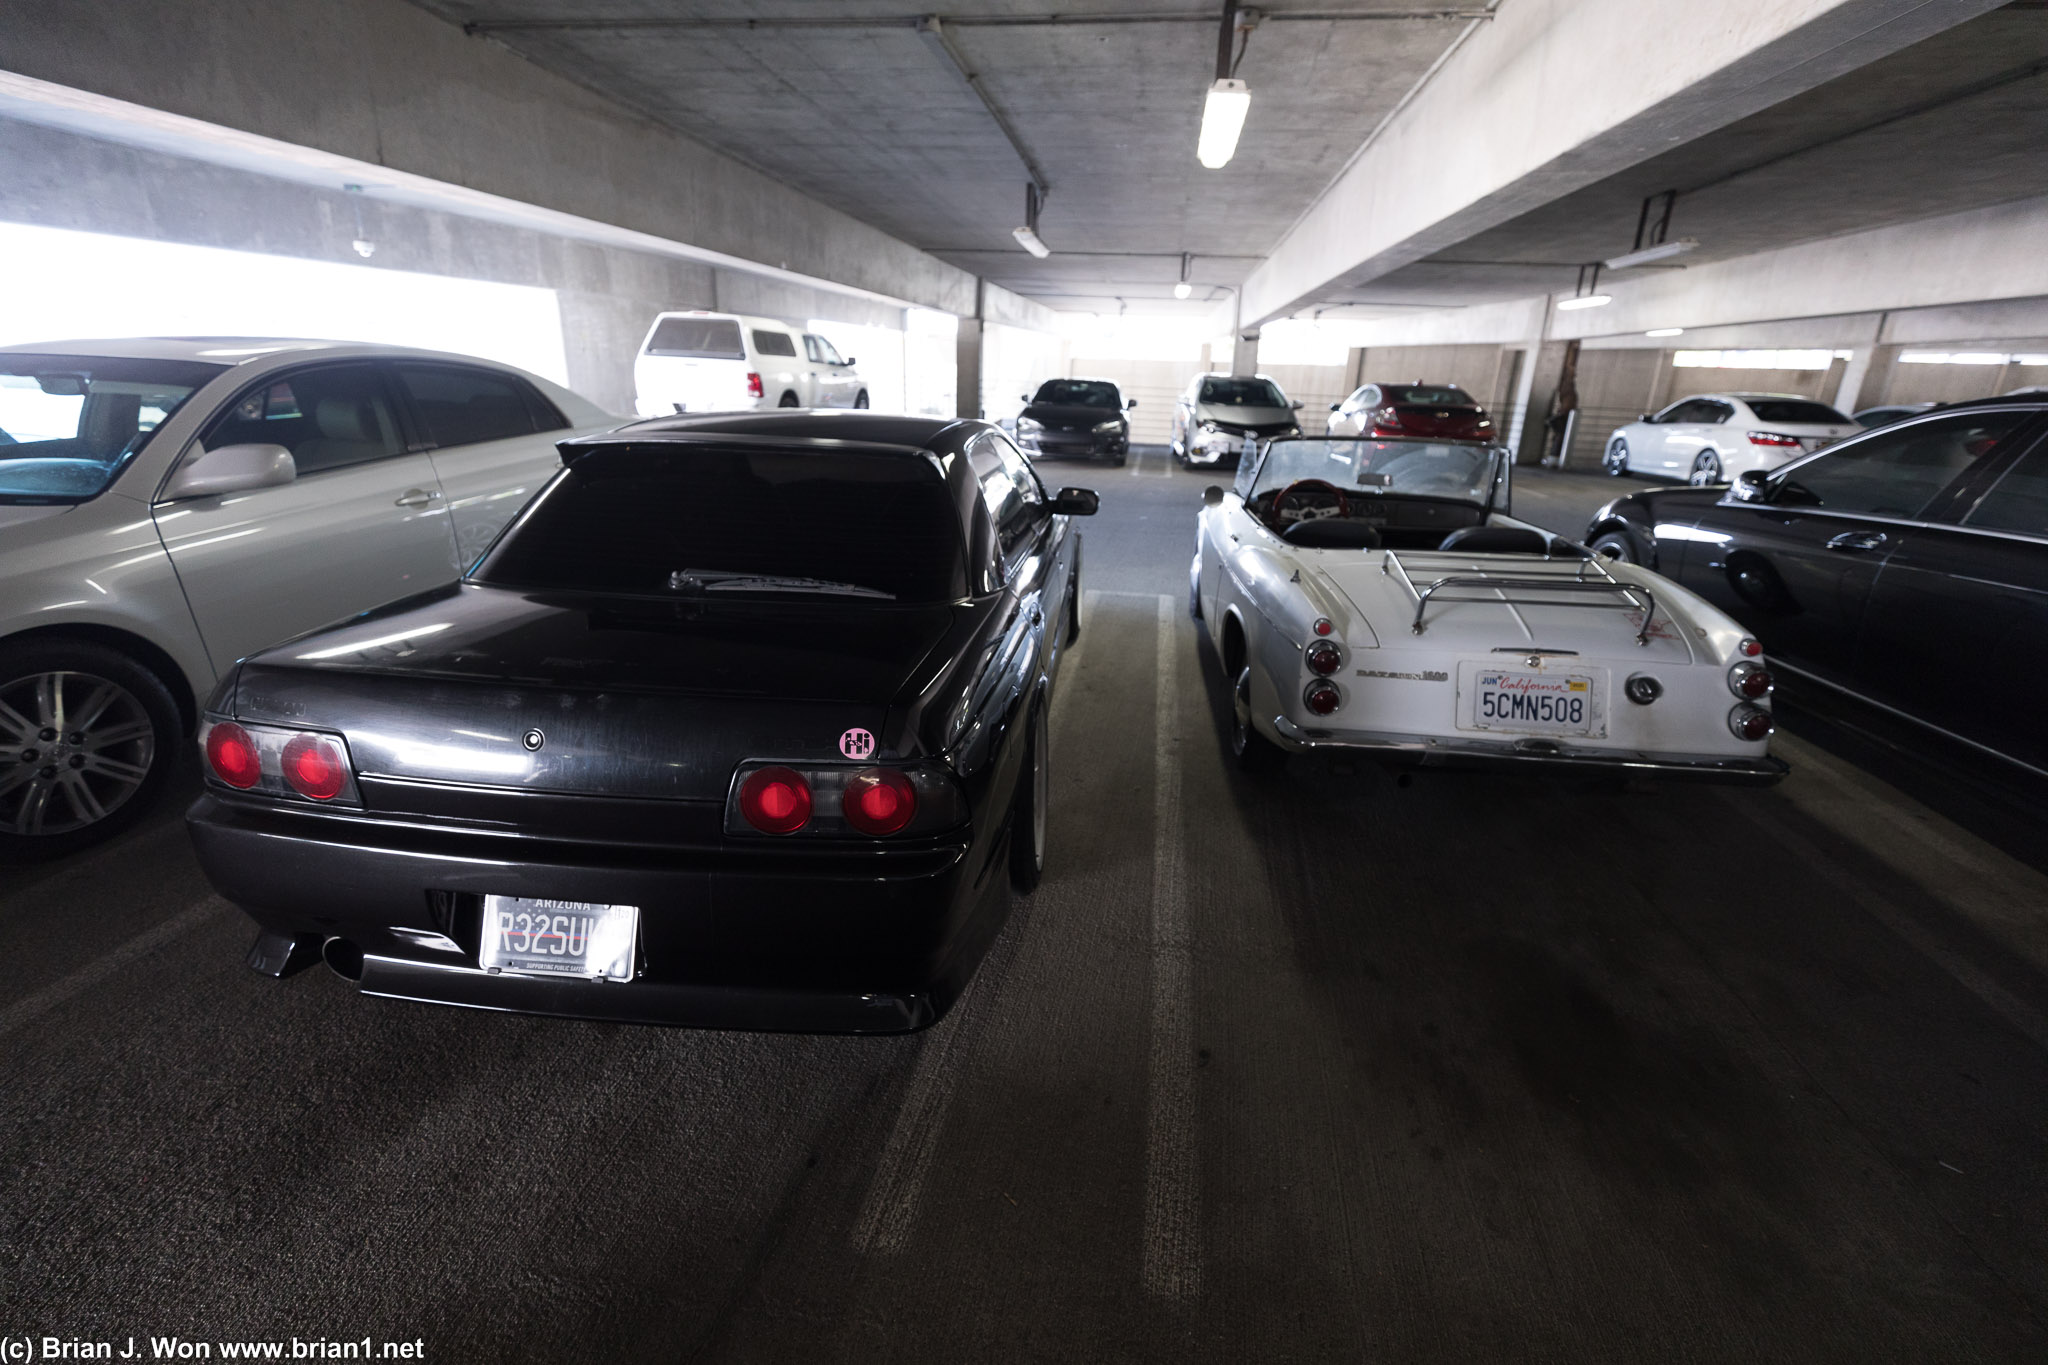 Of course, a Nissan Skyline sedan (R32) next to the Datsun Roadster.